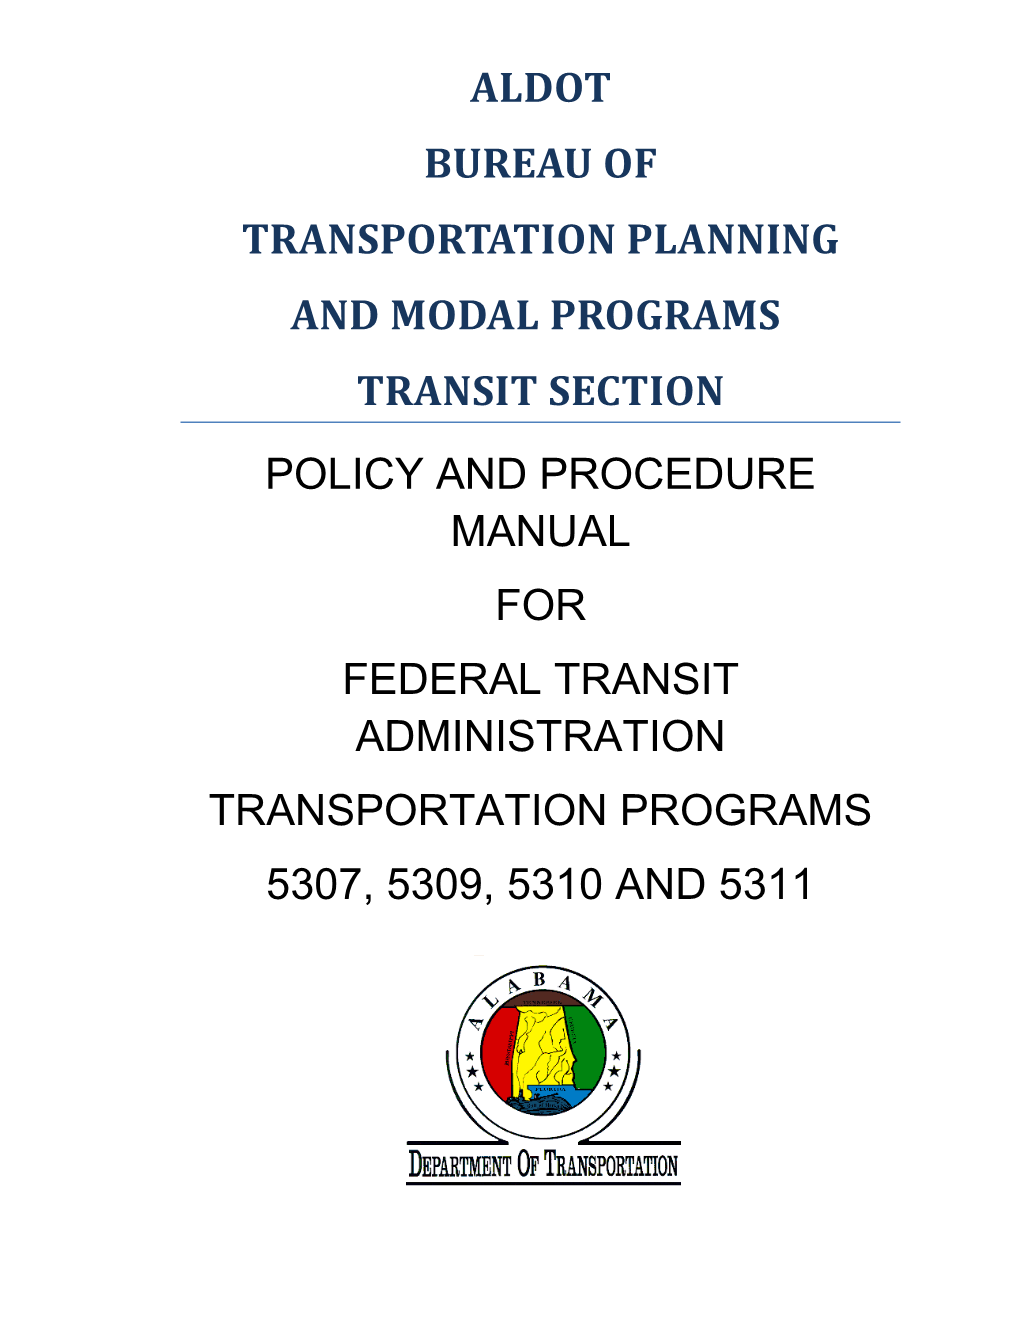 ALOT Policy and Procedure Manual for FTA Grant Programs